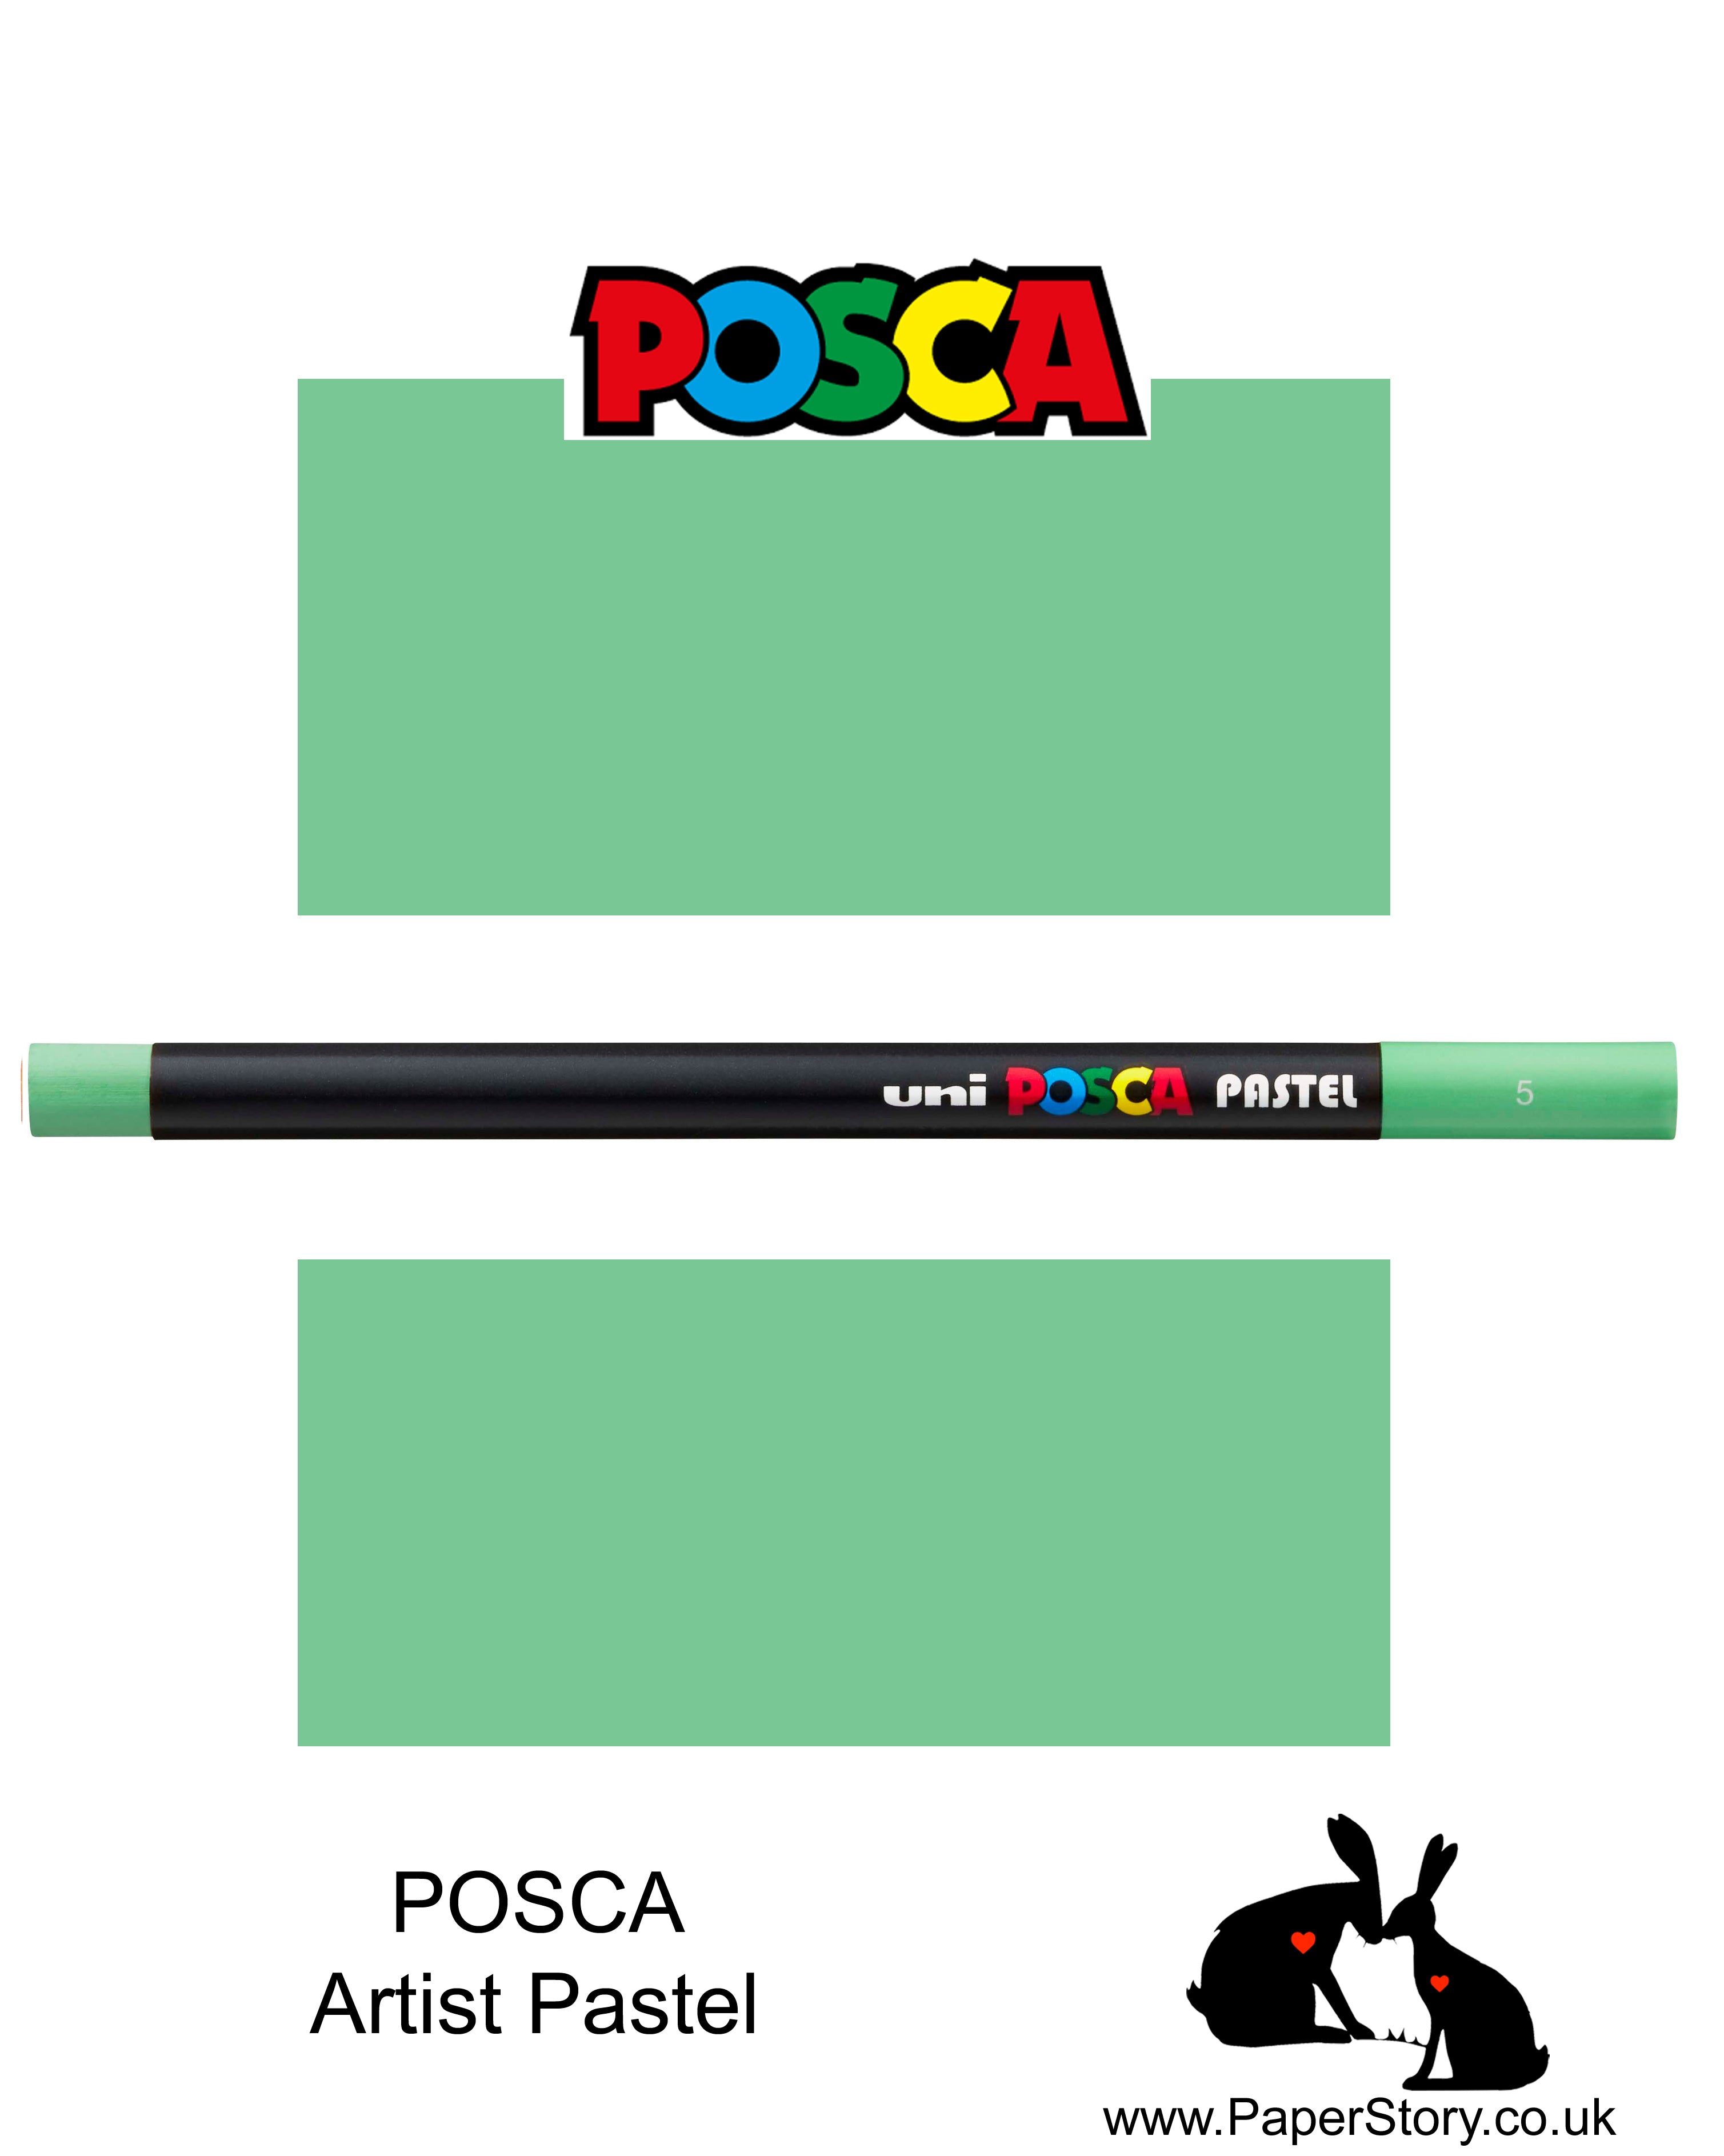 New Uni POSCA Pastels, Light Green colour, these  new style wax and oil mixed pastel colours can be blended and overlaid, you can stipple, colour block, cross-hatch, scratch and outline. You can heat the sticks to create textured effects.